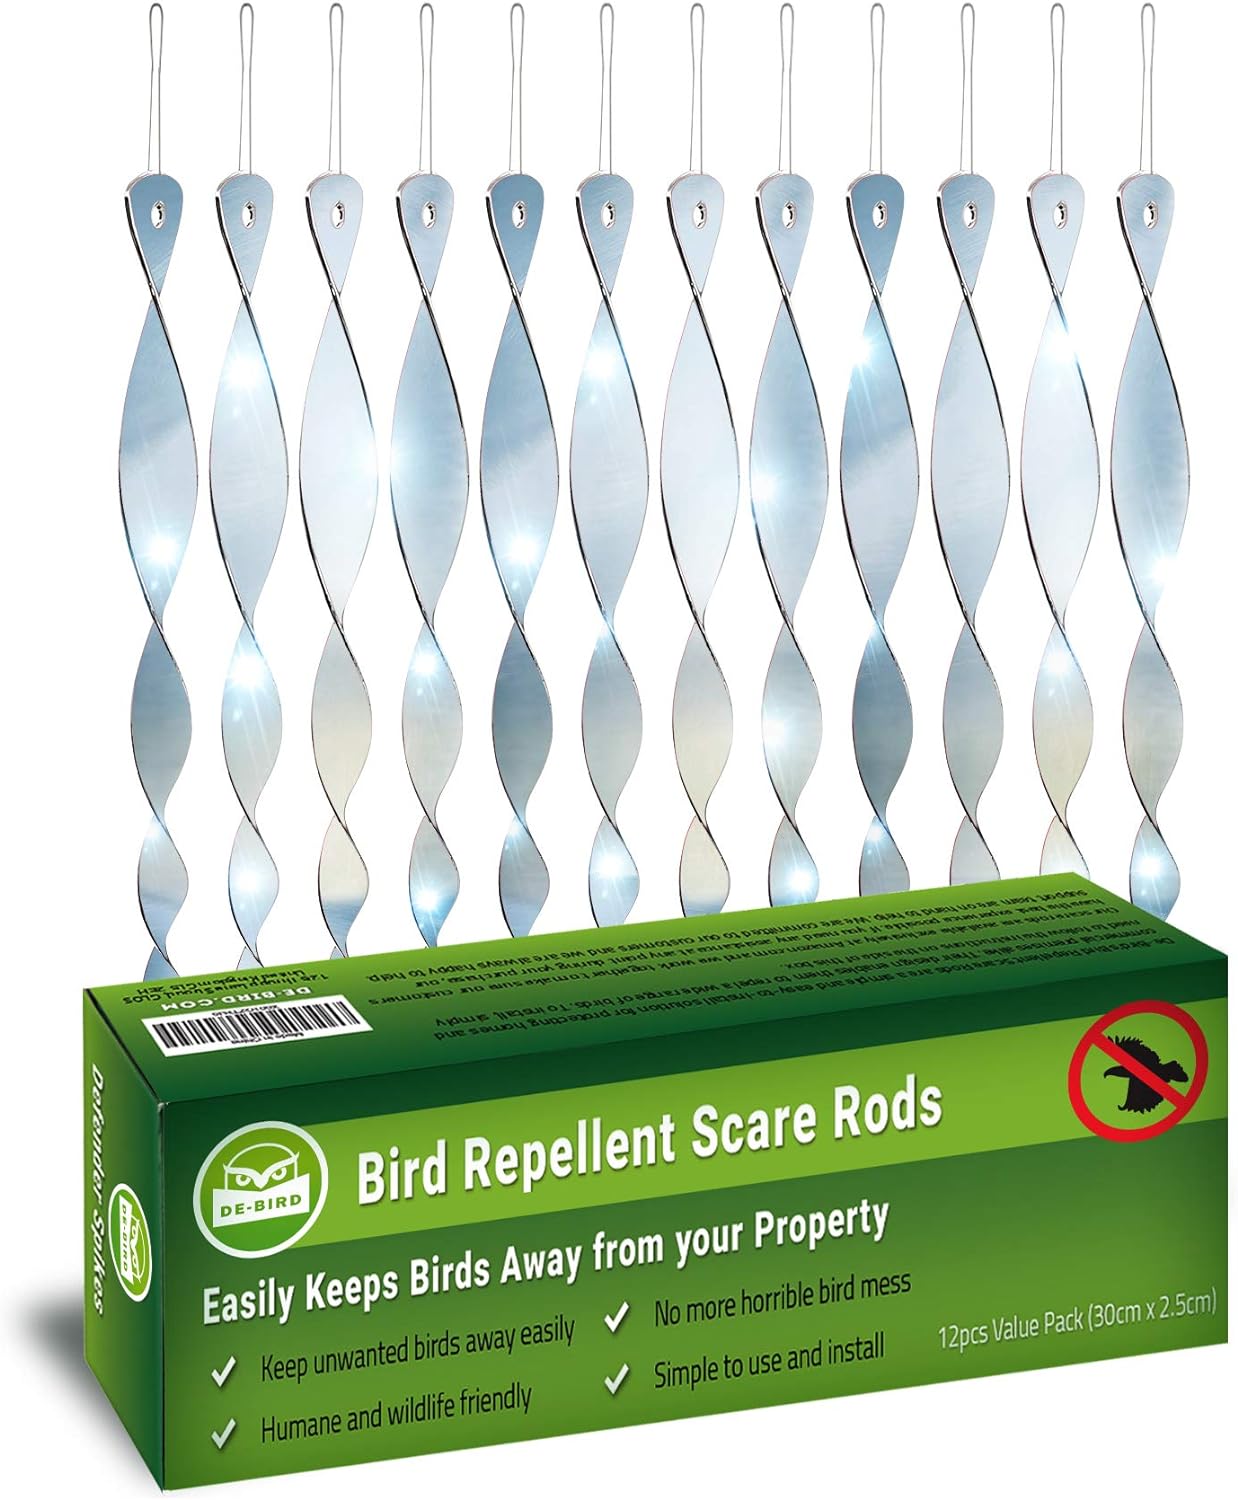 Bird Scare Rods Owl Decoy Bird Repellent [Stop Woodpeckers, Pigeons] Keep Away Pests with Outdoor Repeller Device in Garden or Yard [Scares Many Animals] Works with Tape, Spikes, Ultrasonic and Spray